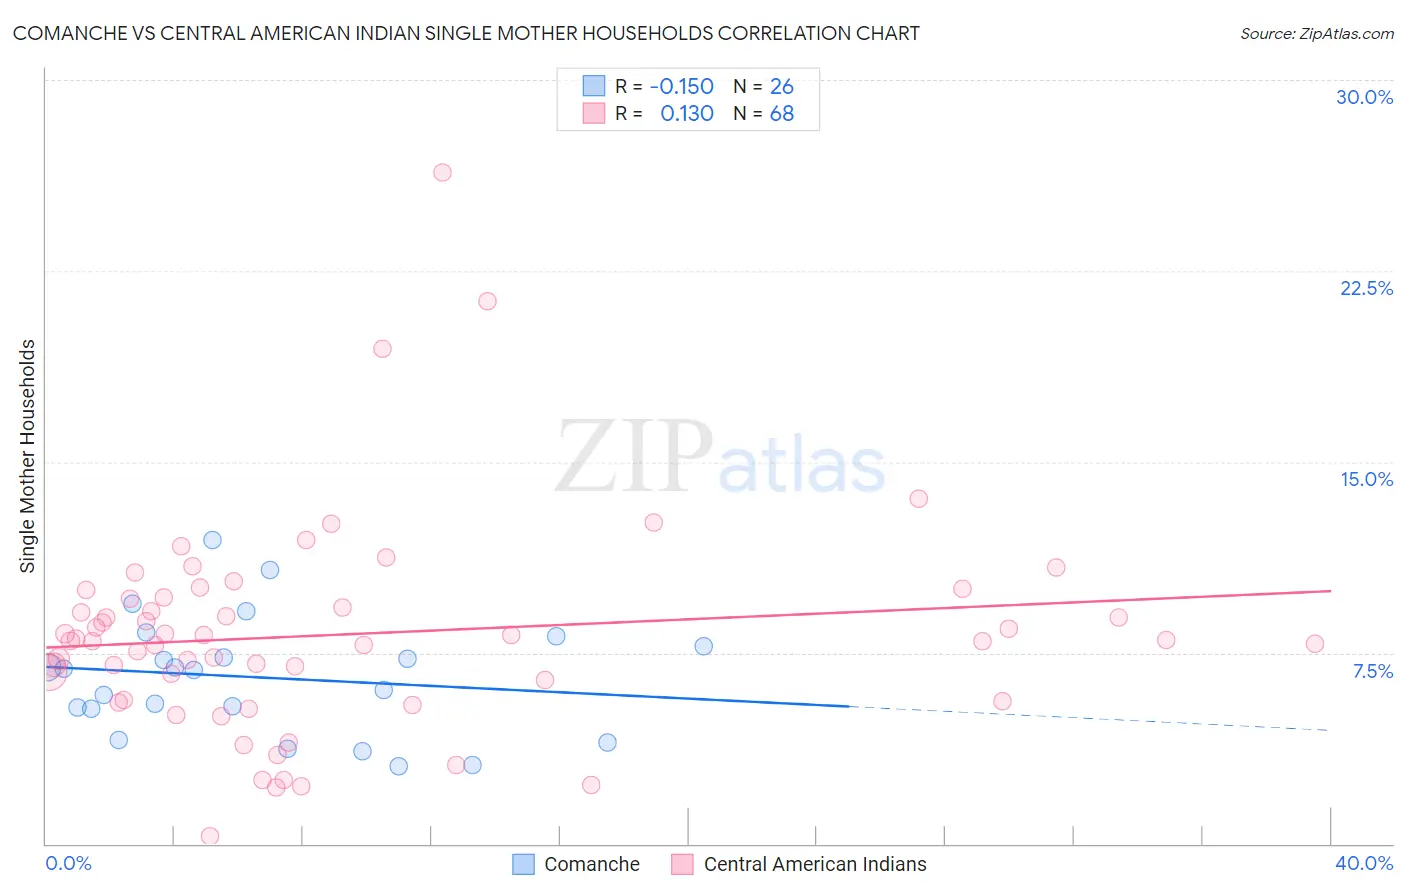 Comanche vs Central American Indian Single Mother Households